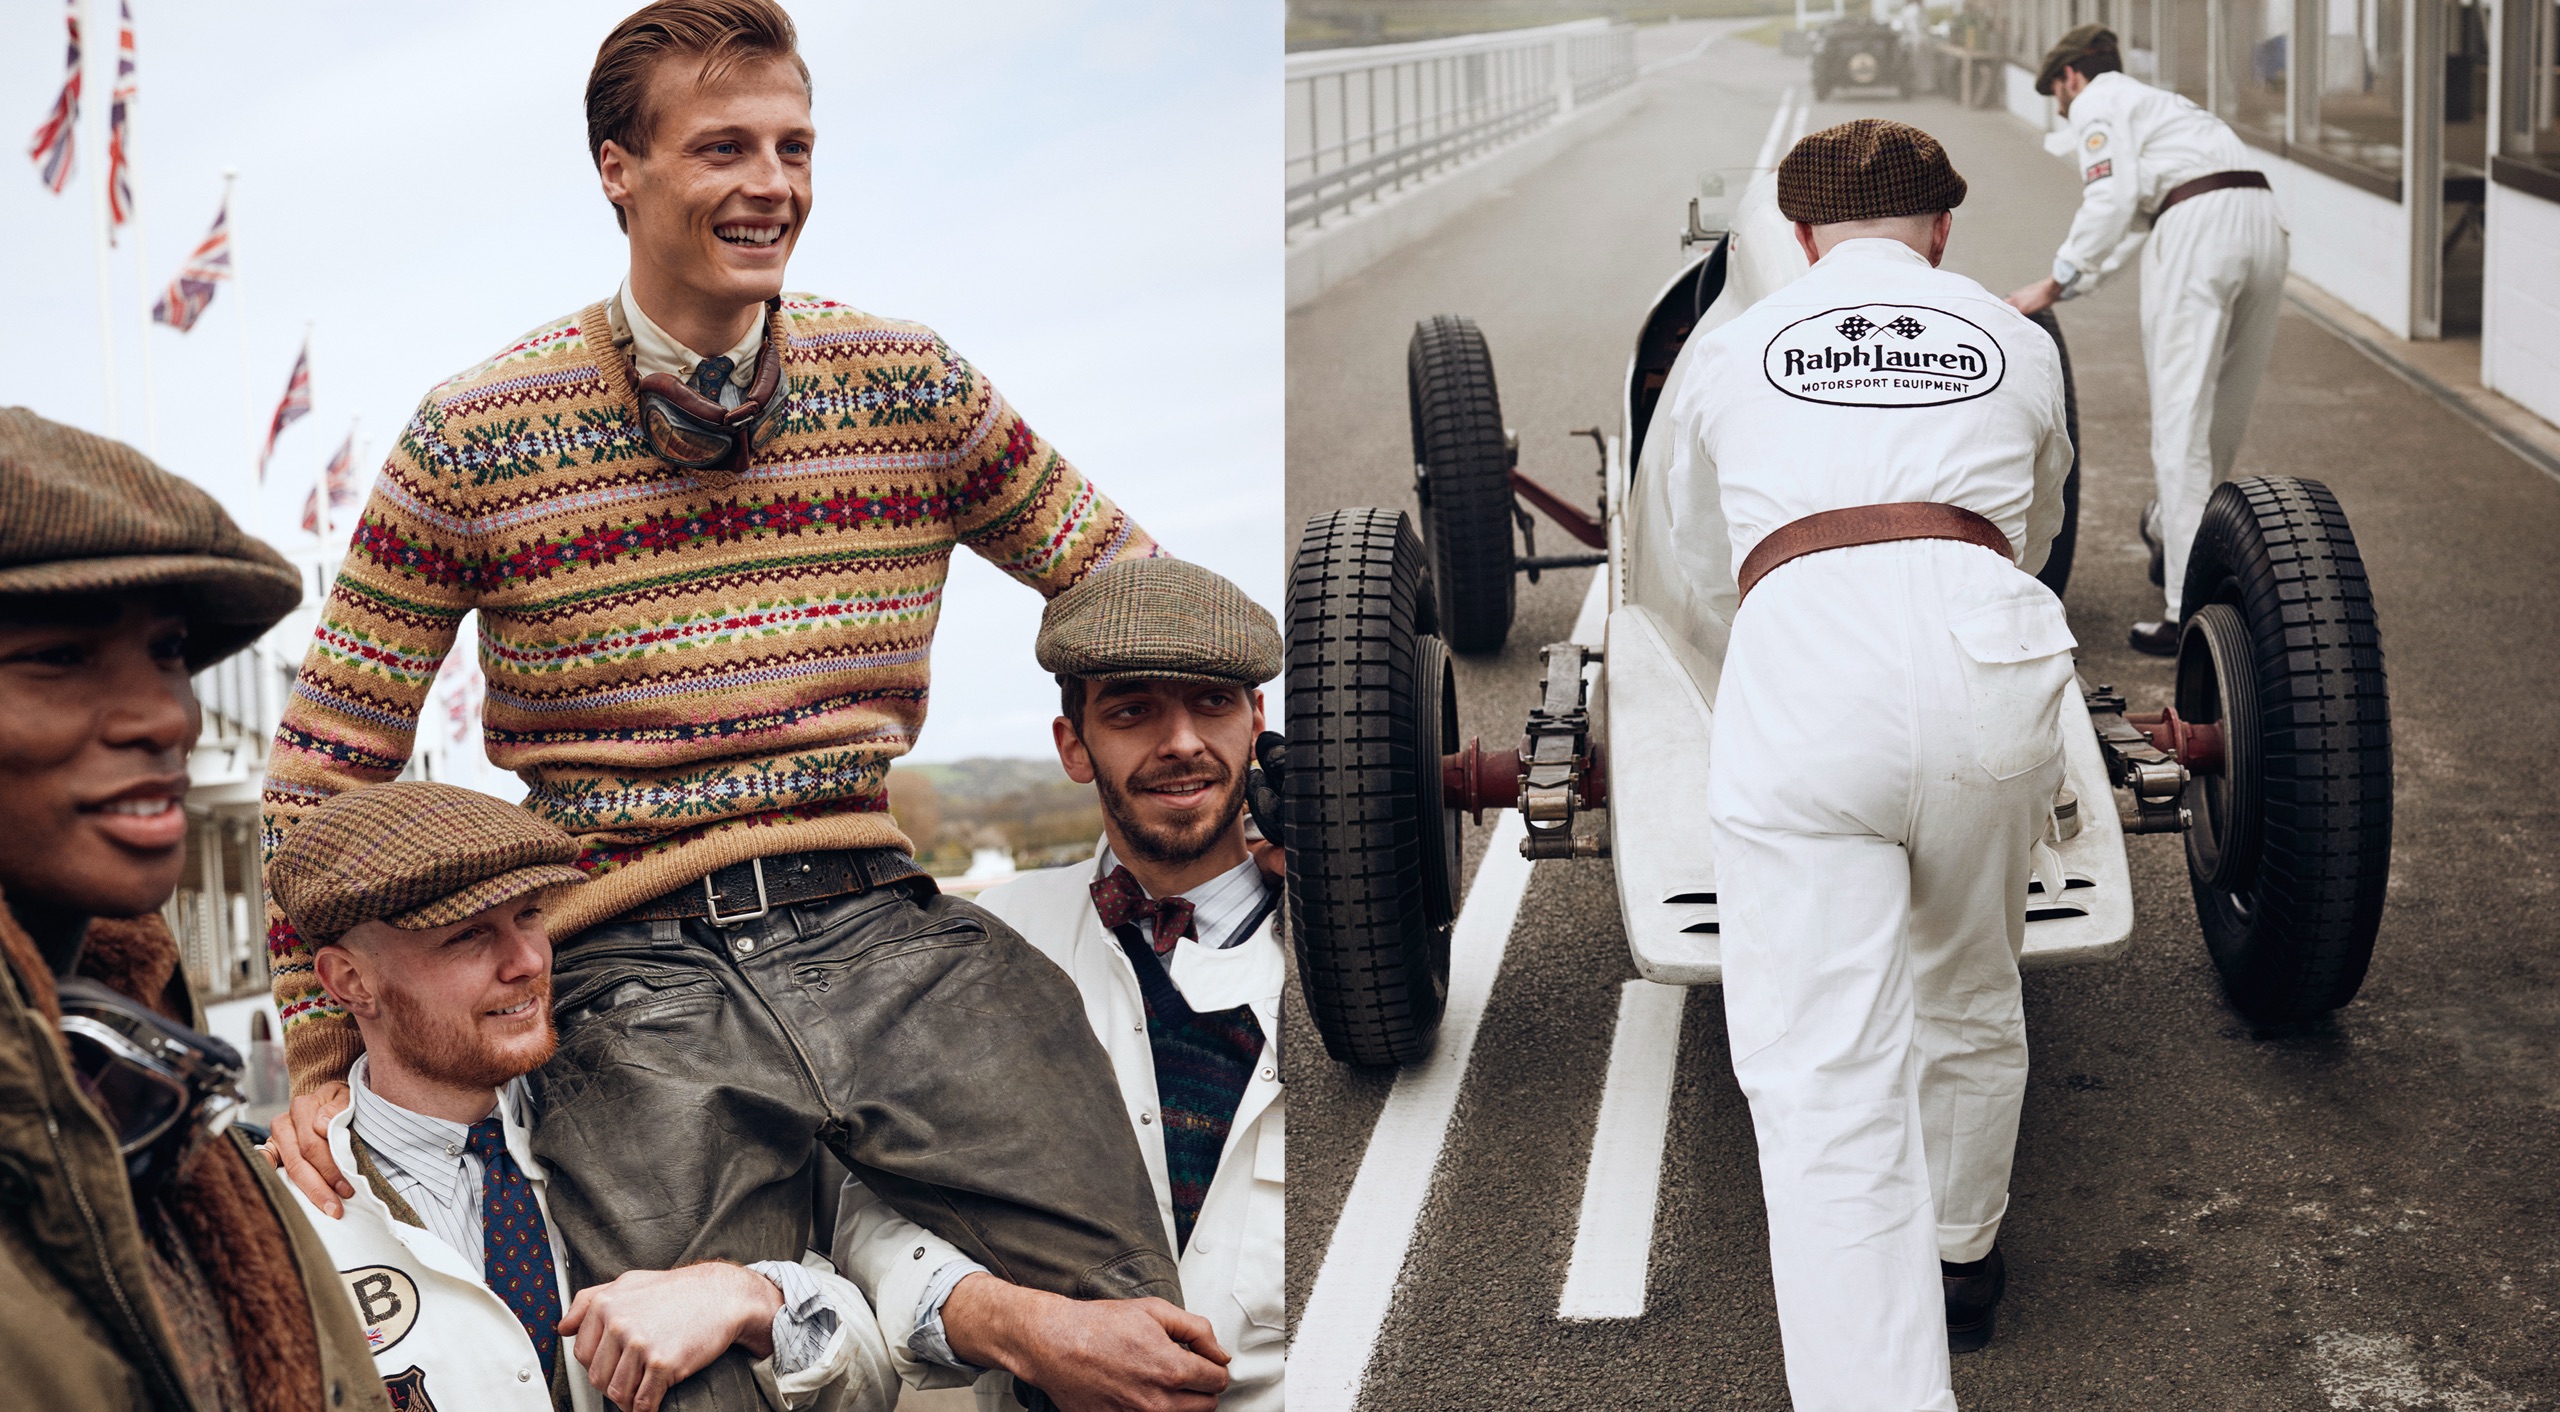 <strong>ON LOCATION</strong><br/><span>This season of Polo Originals, inspired by the golden era of Grand Prix car racing, was photographed at the Goodwood Motor Circuit, which is located in West Sussex, on the 12,000-acre Goodwood Estate. The Circuit has since become known for hosting a number of prestigious motorsport events, including the famous Festival of Speed and Revival.</span> <br/><rlmag_link href="https://www.ralphlauren.global/uz/en/search?cgid=brands-prl-tough-and-refined-cg"><button class="shop-collection">Shop the Story</button></rlmag_link>